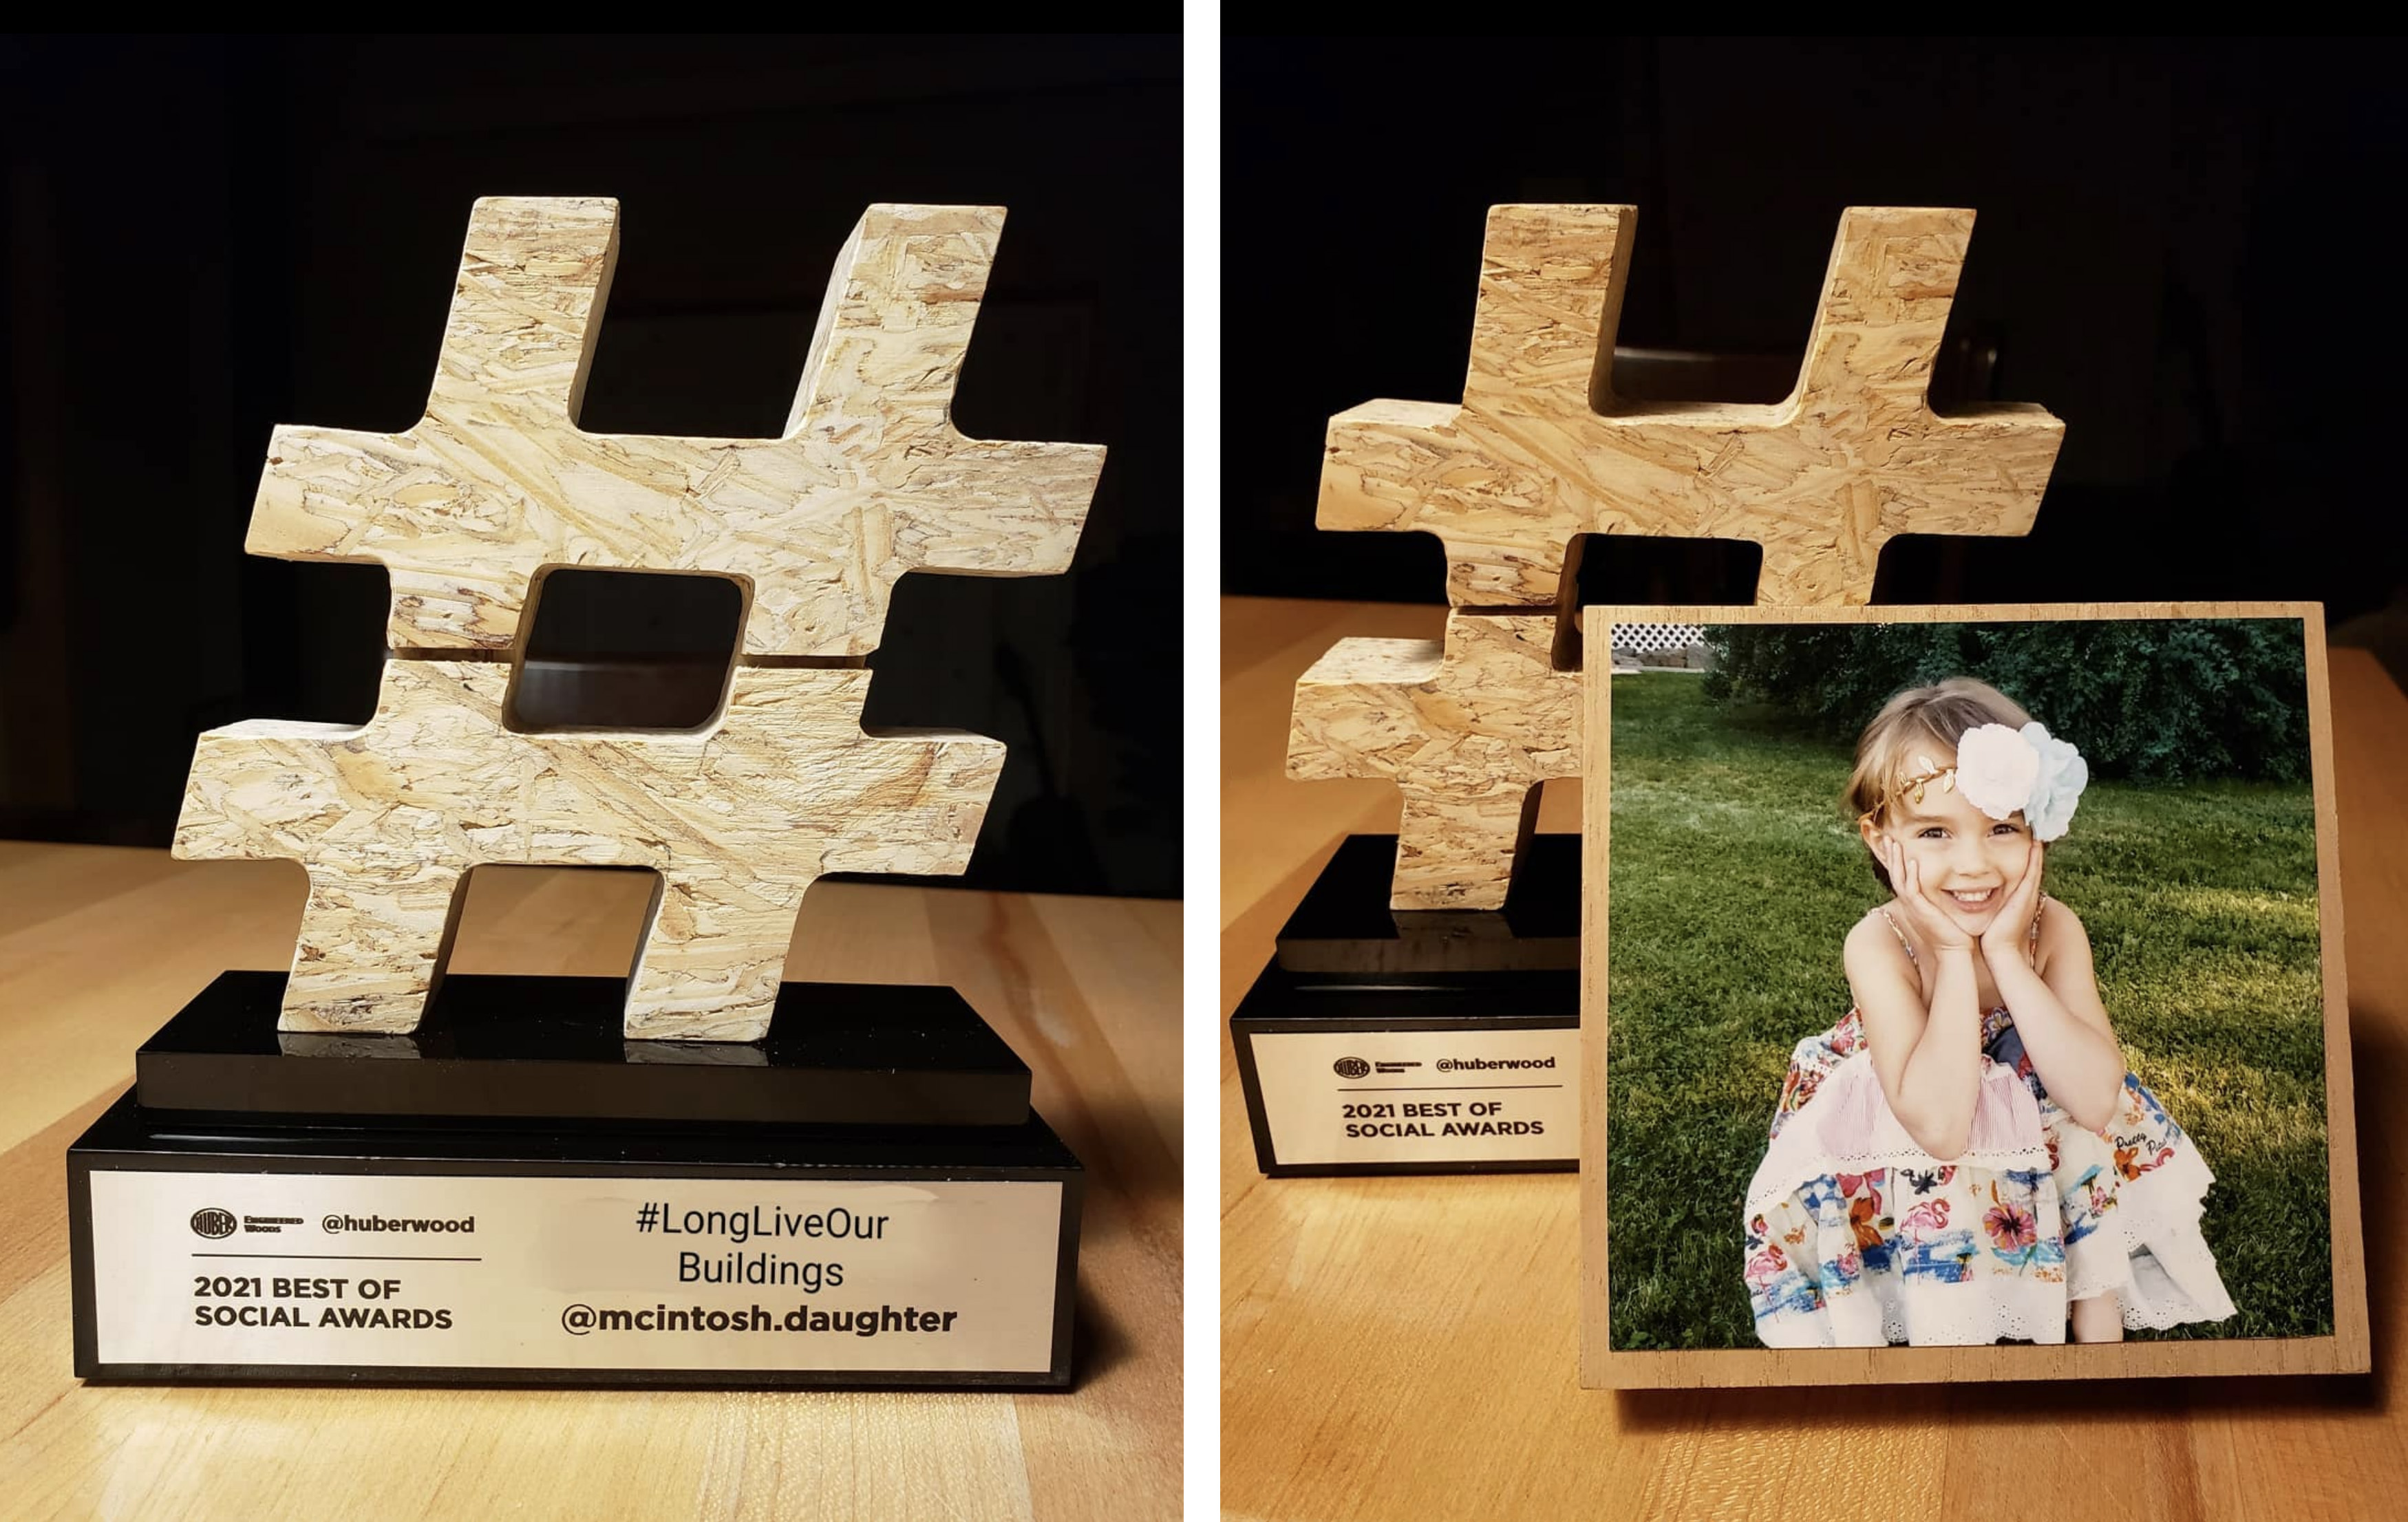 Huber Engineered Woods Award fashioned in the shape of a hashtag